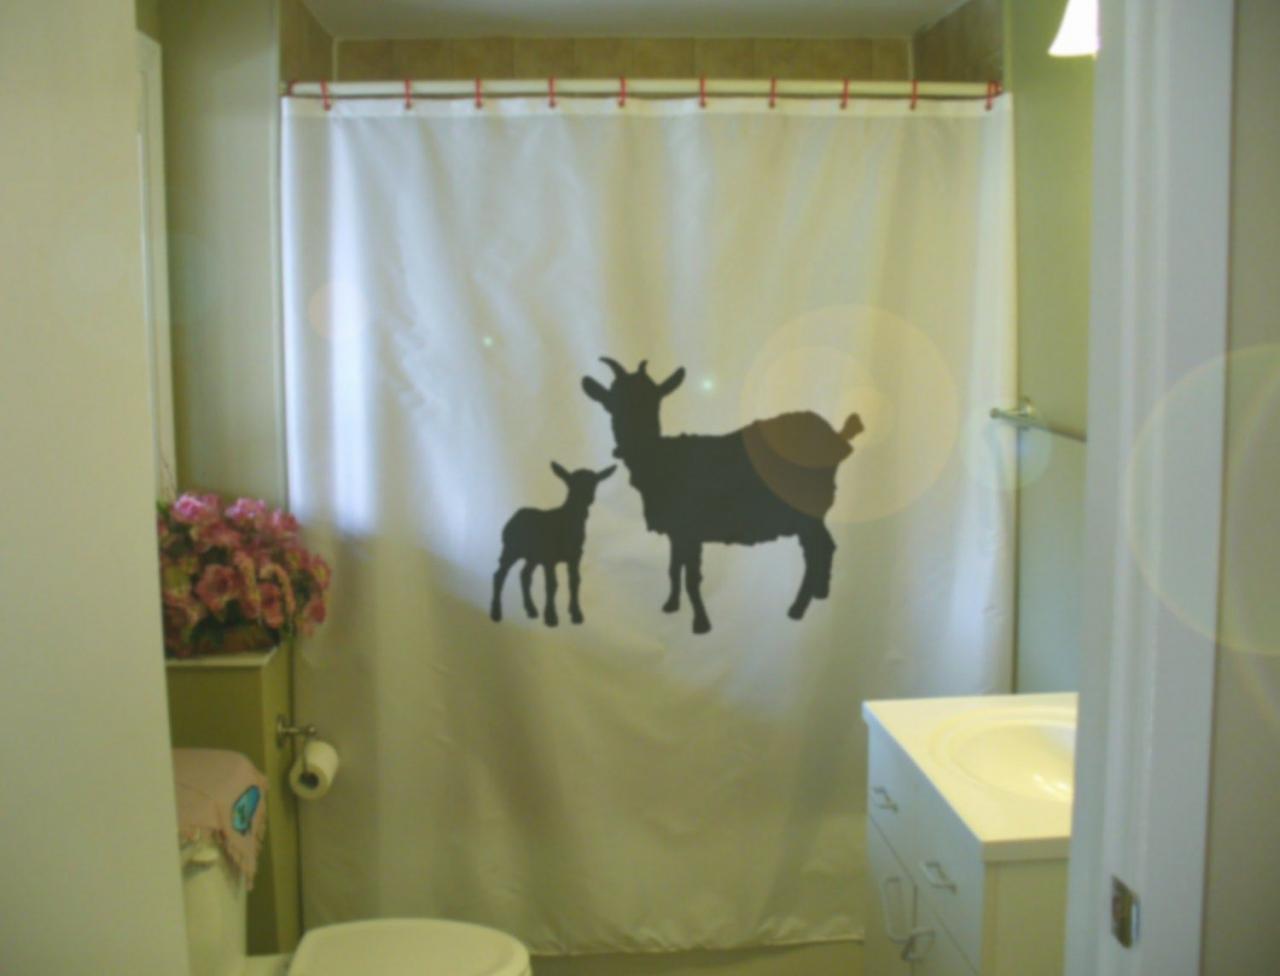 mother goat and kid shower curtain farm animal farming nature